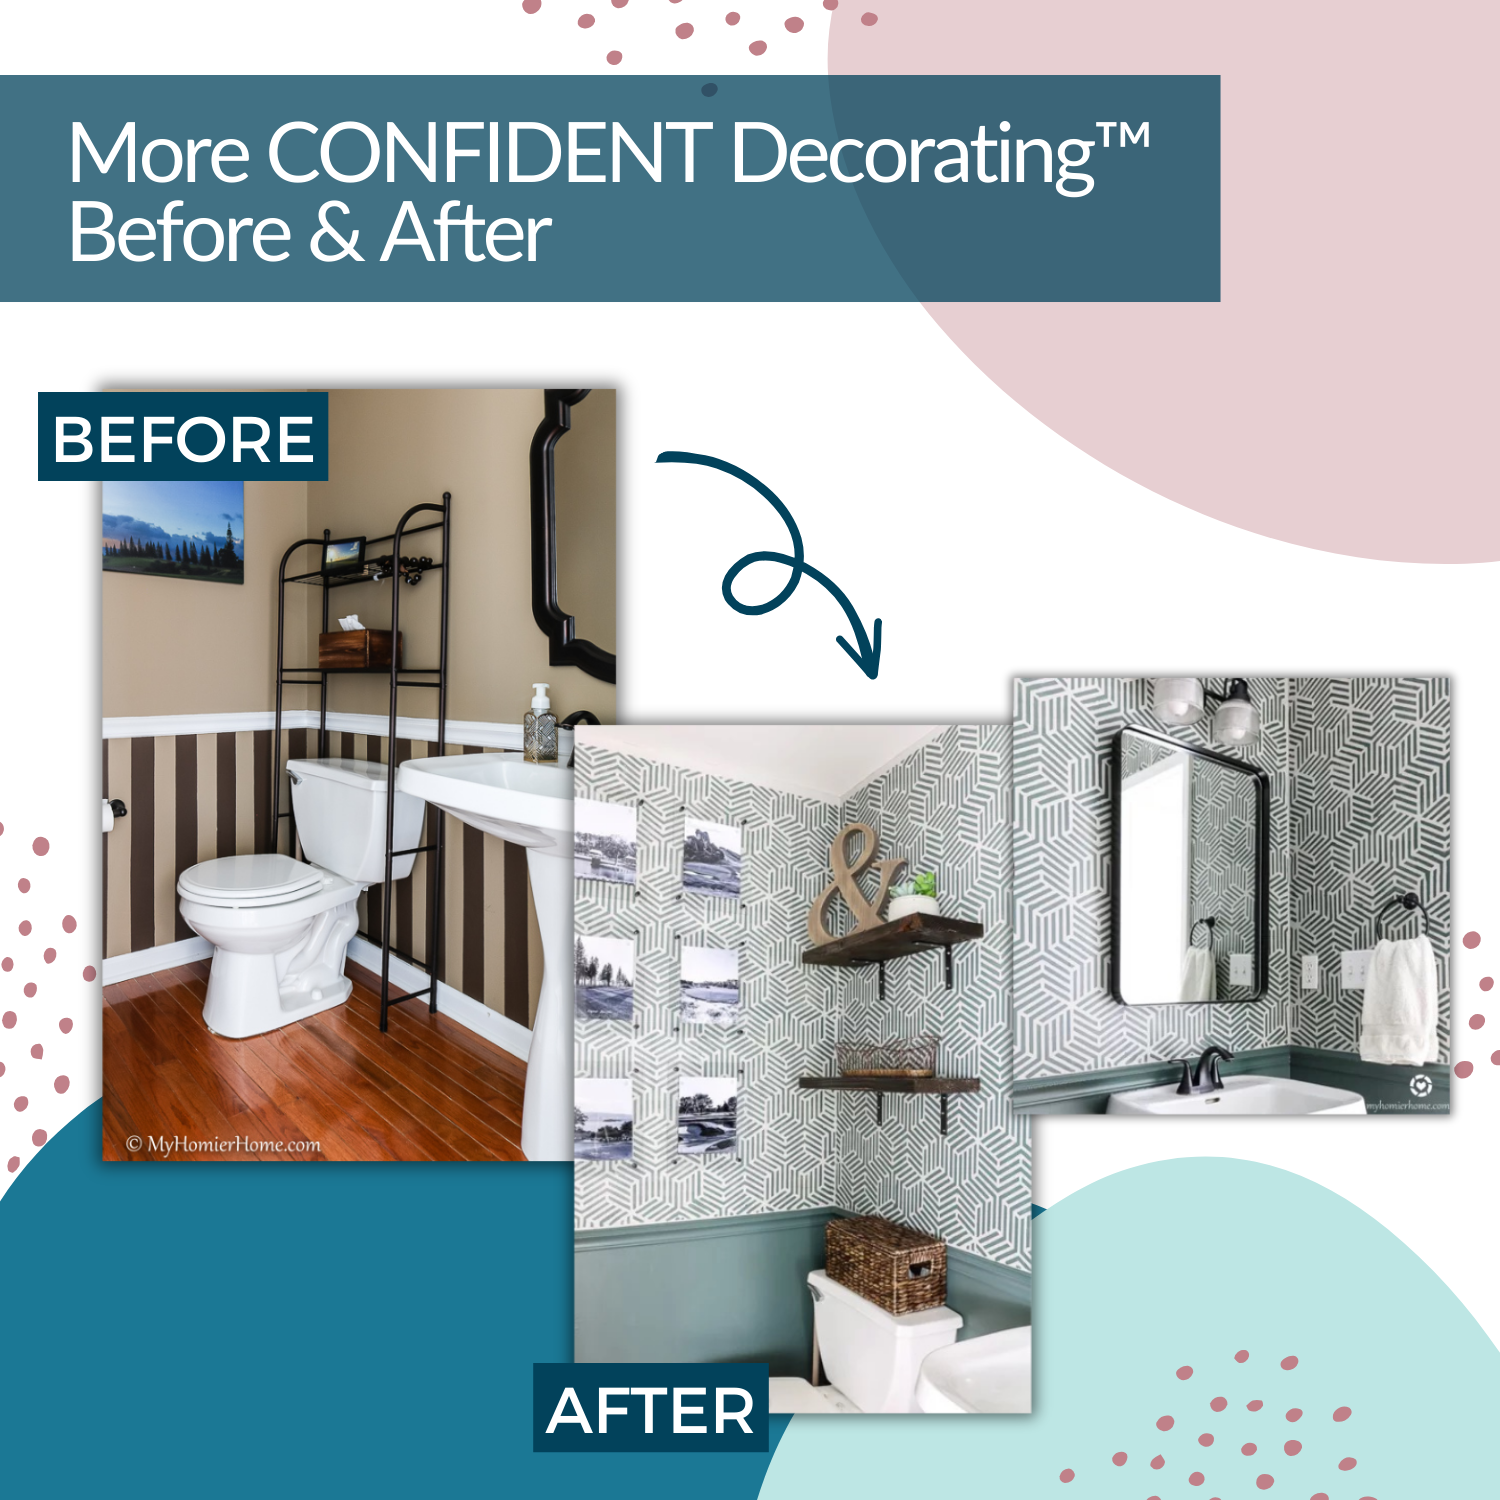 Side-by-side comparison of a bathroom before and after a decor upgrade. The before image shows plain walls and minimal decor, while the after image features patterned wallpaper, new shelves, and enhanced decor. This transformation was made possible with our Confident Decorating™ Self-Study from My Homier Home.